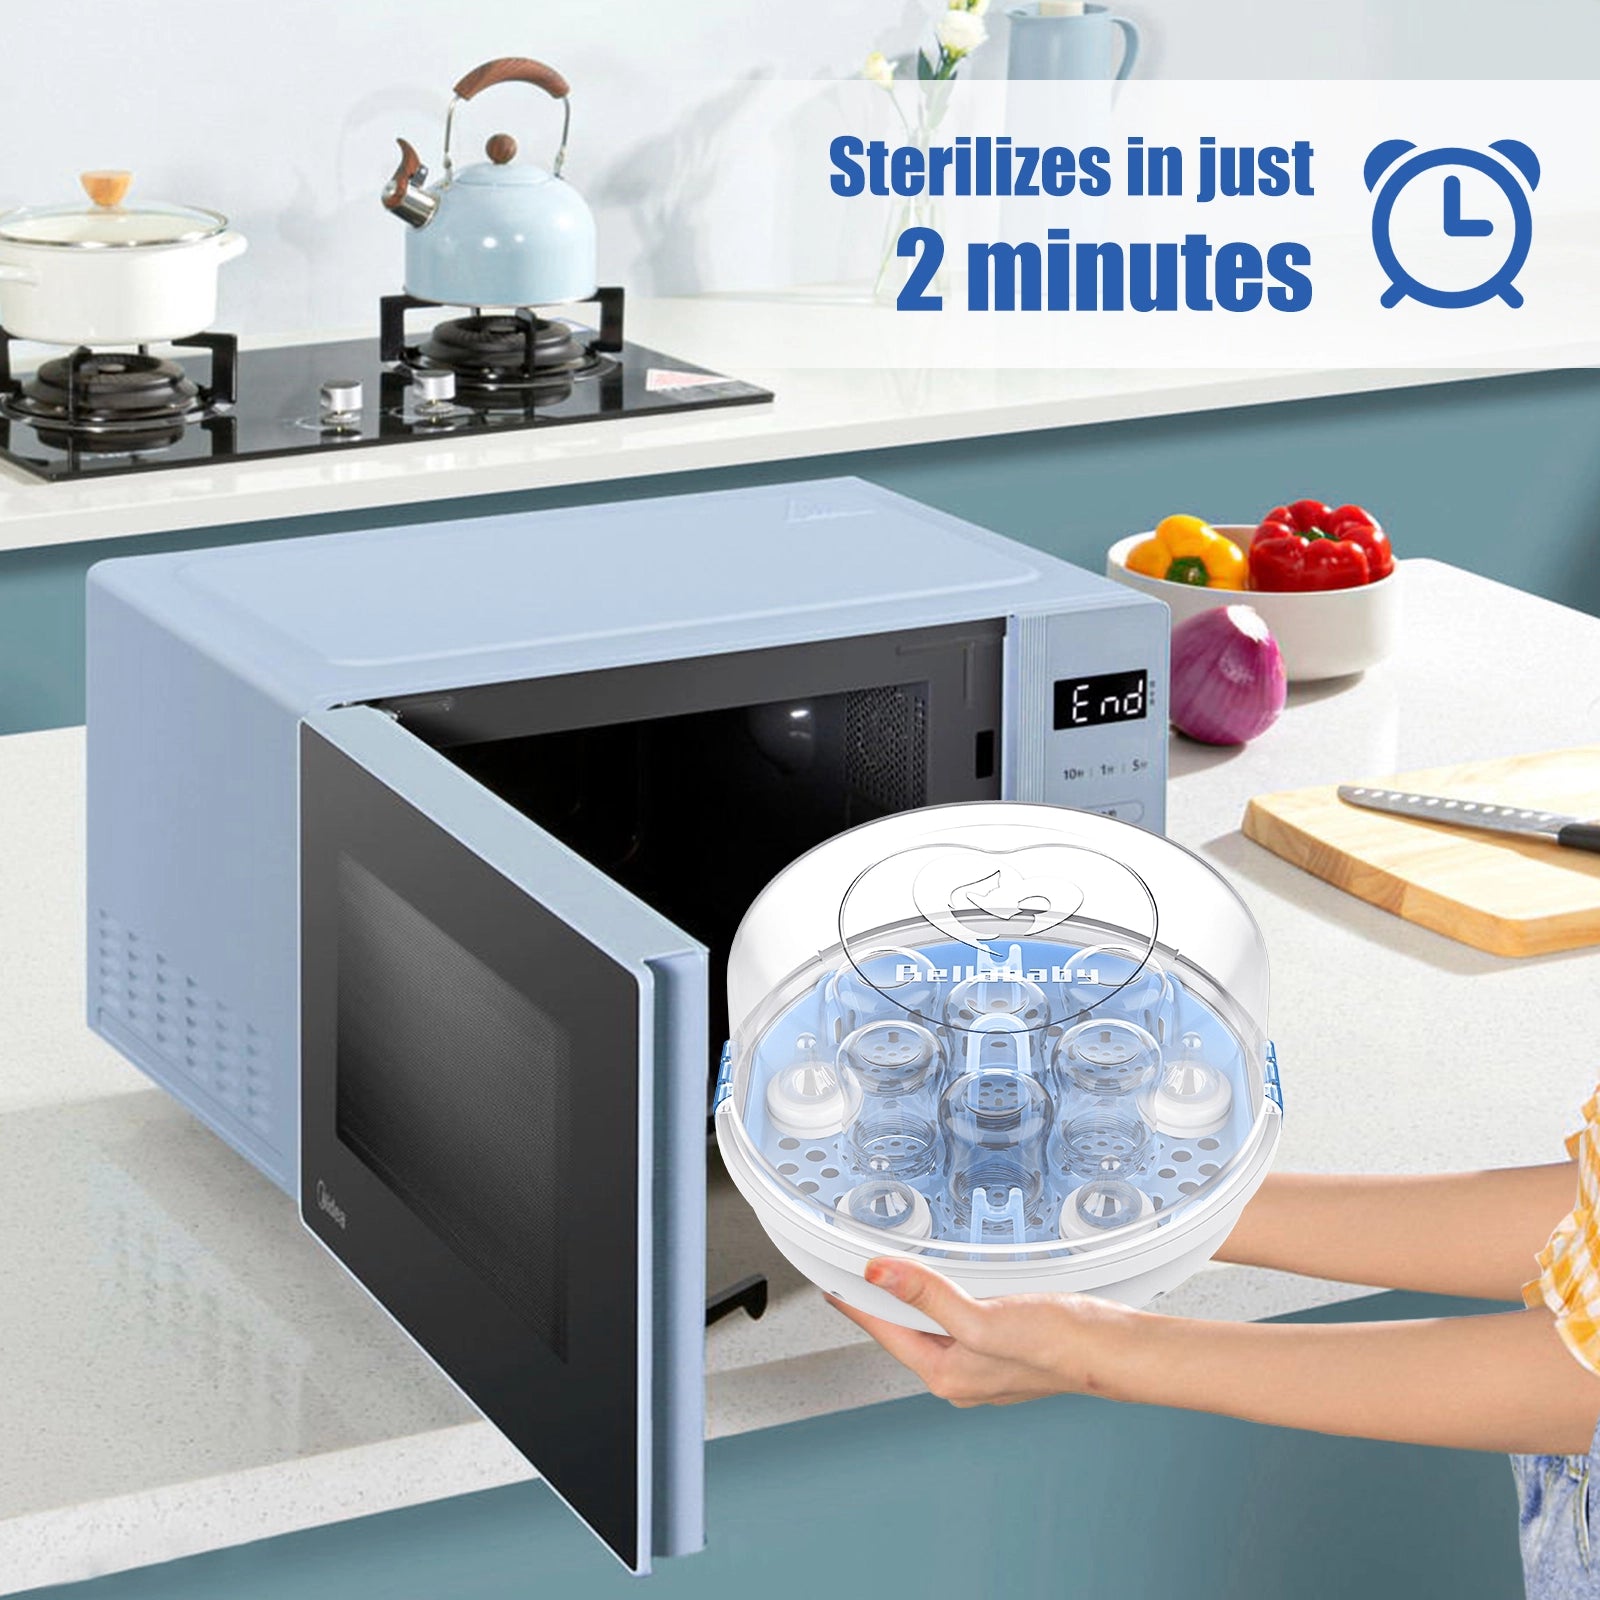 Put the microwave sterilizer in the microwave oven